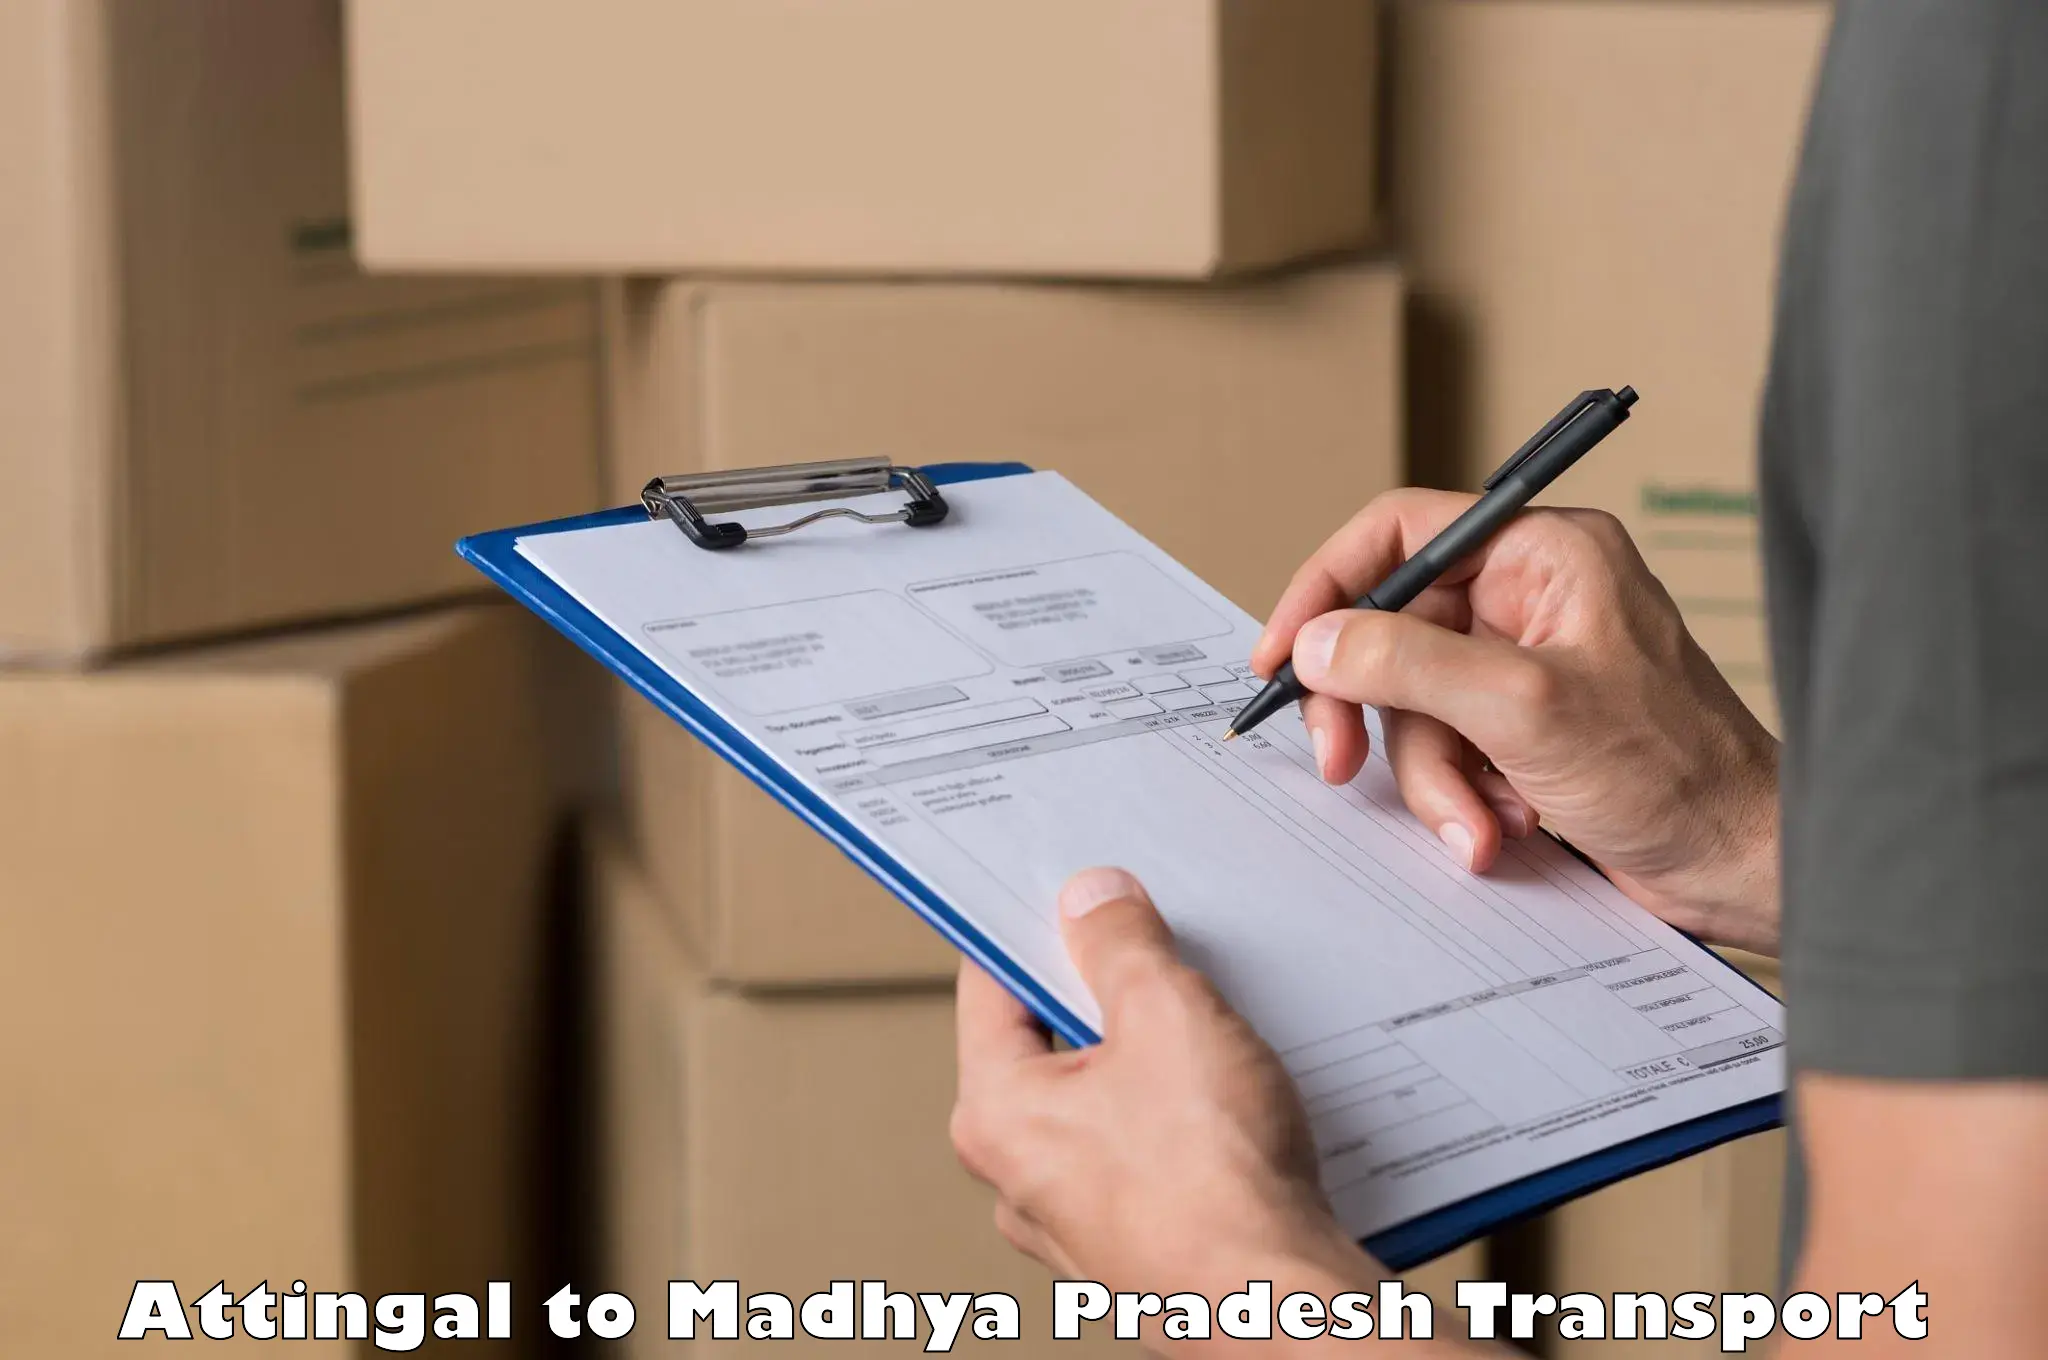 Transport shared services Attingal to Indore